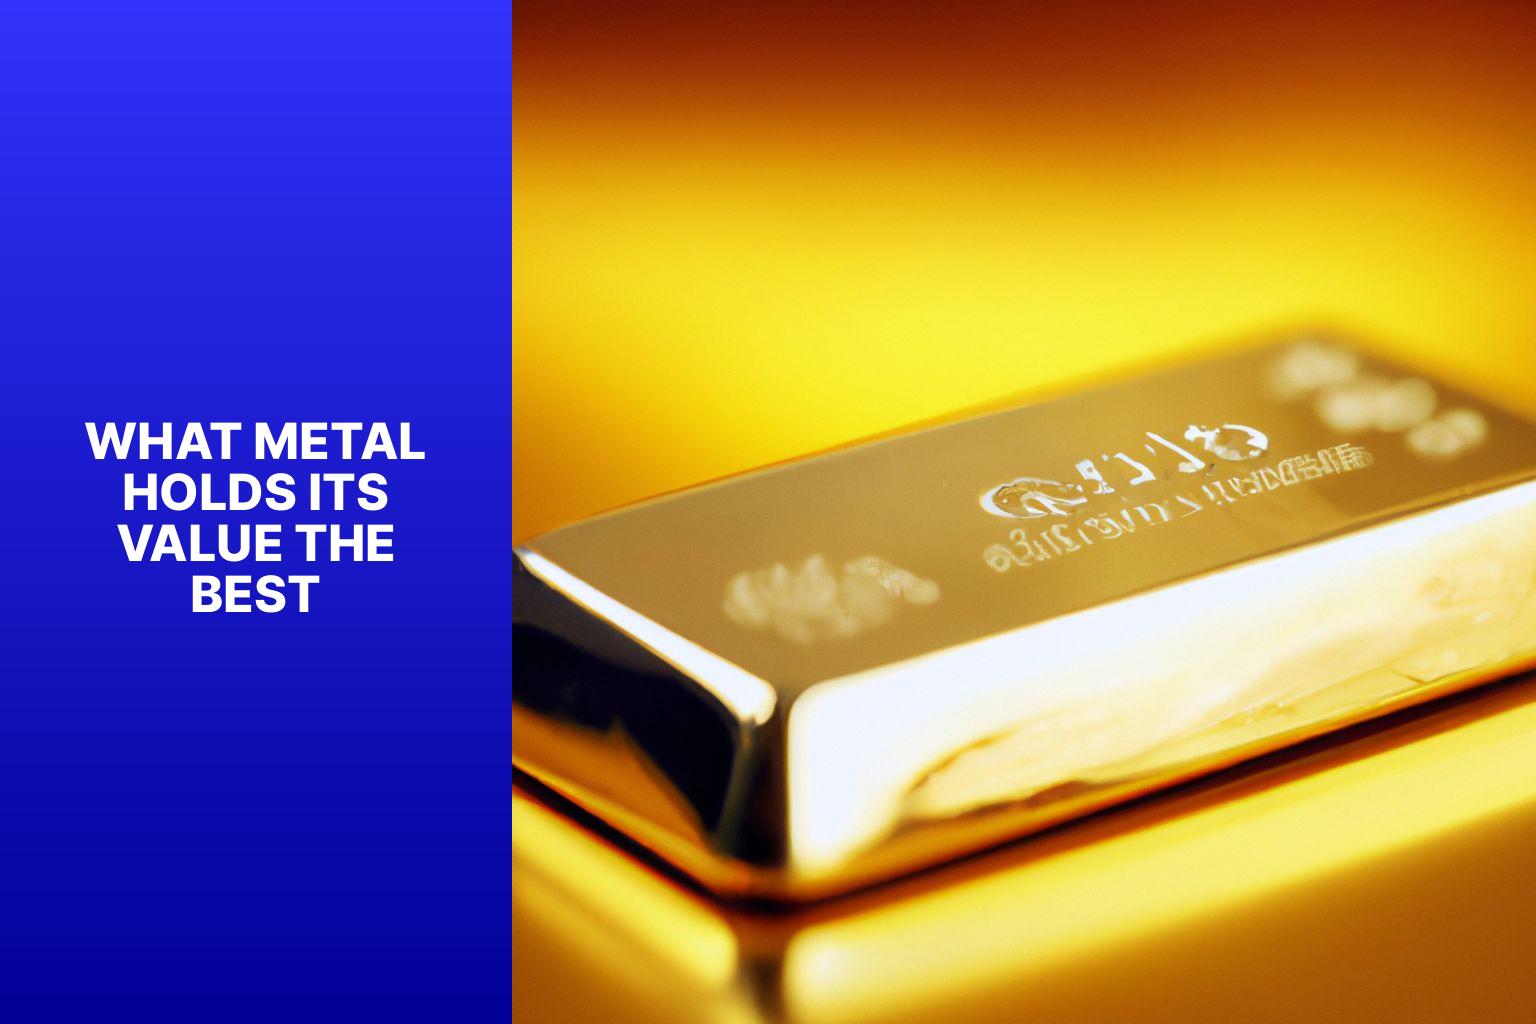 What Metal Holds Its Value The Best